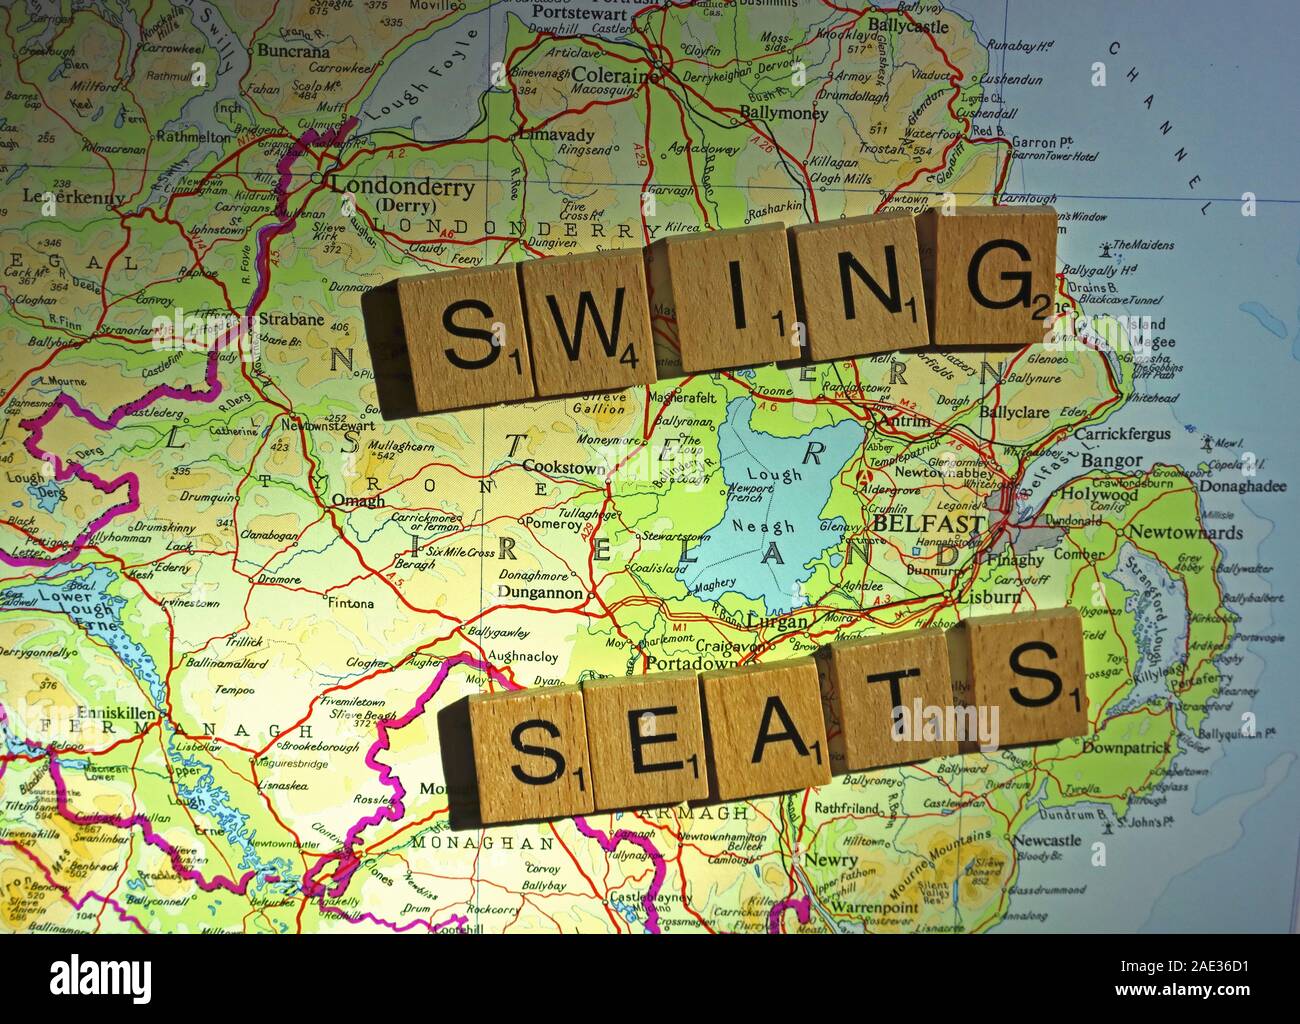 Swing Seats in NI Northern Ireland spelt in Scrabble letters on a UK map - General Election, elections, party political,leaders,parties,claims,doubts Stock Photo